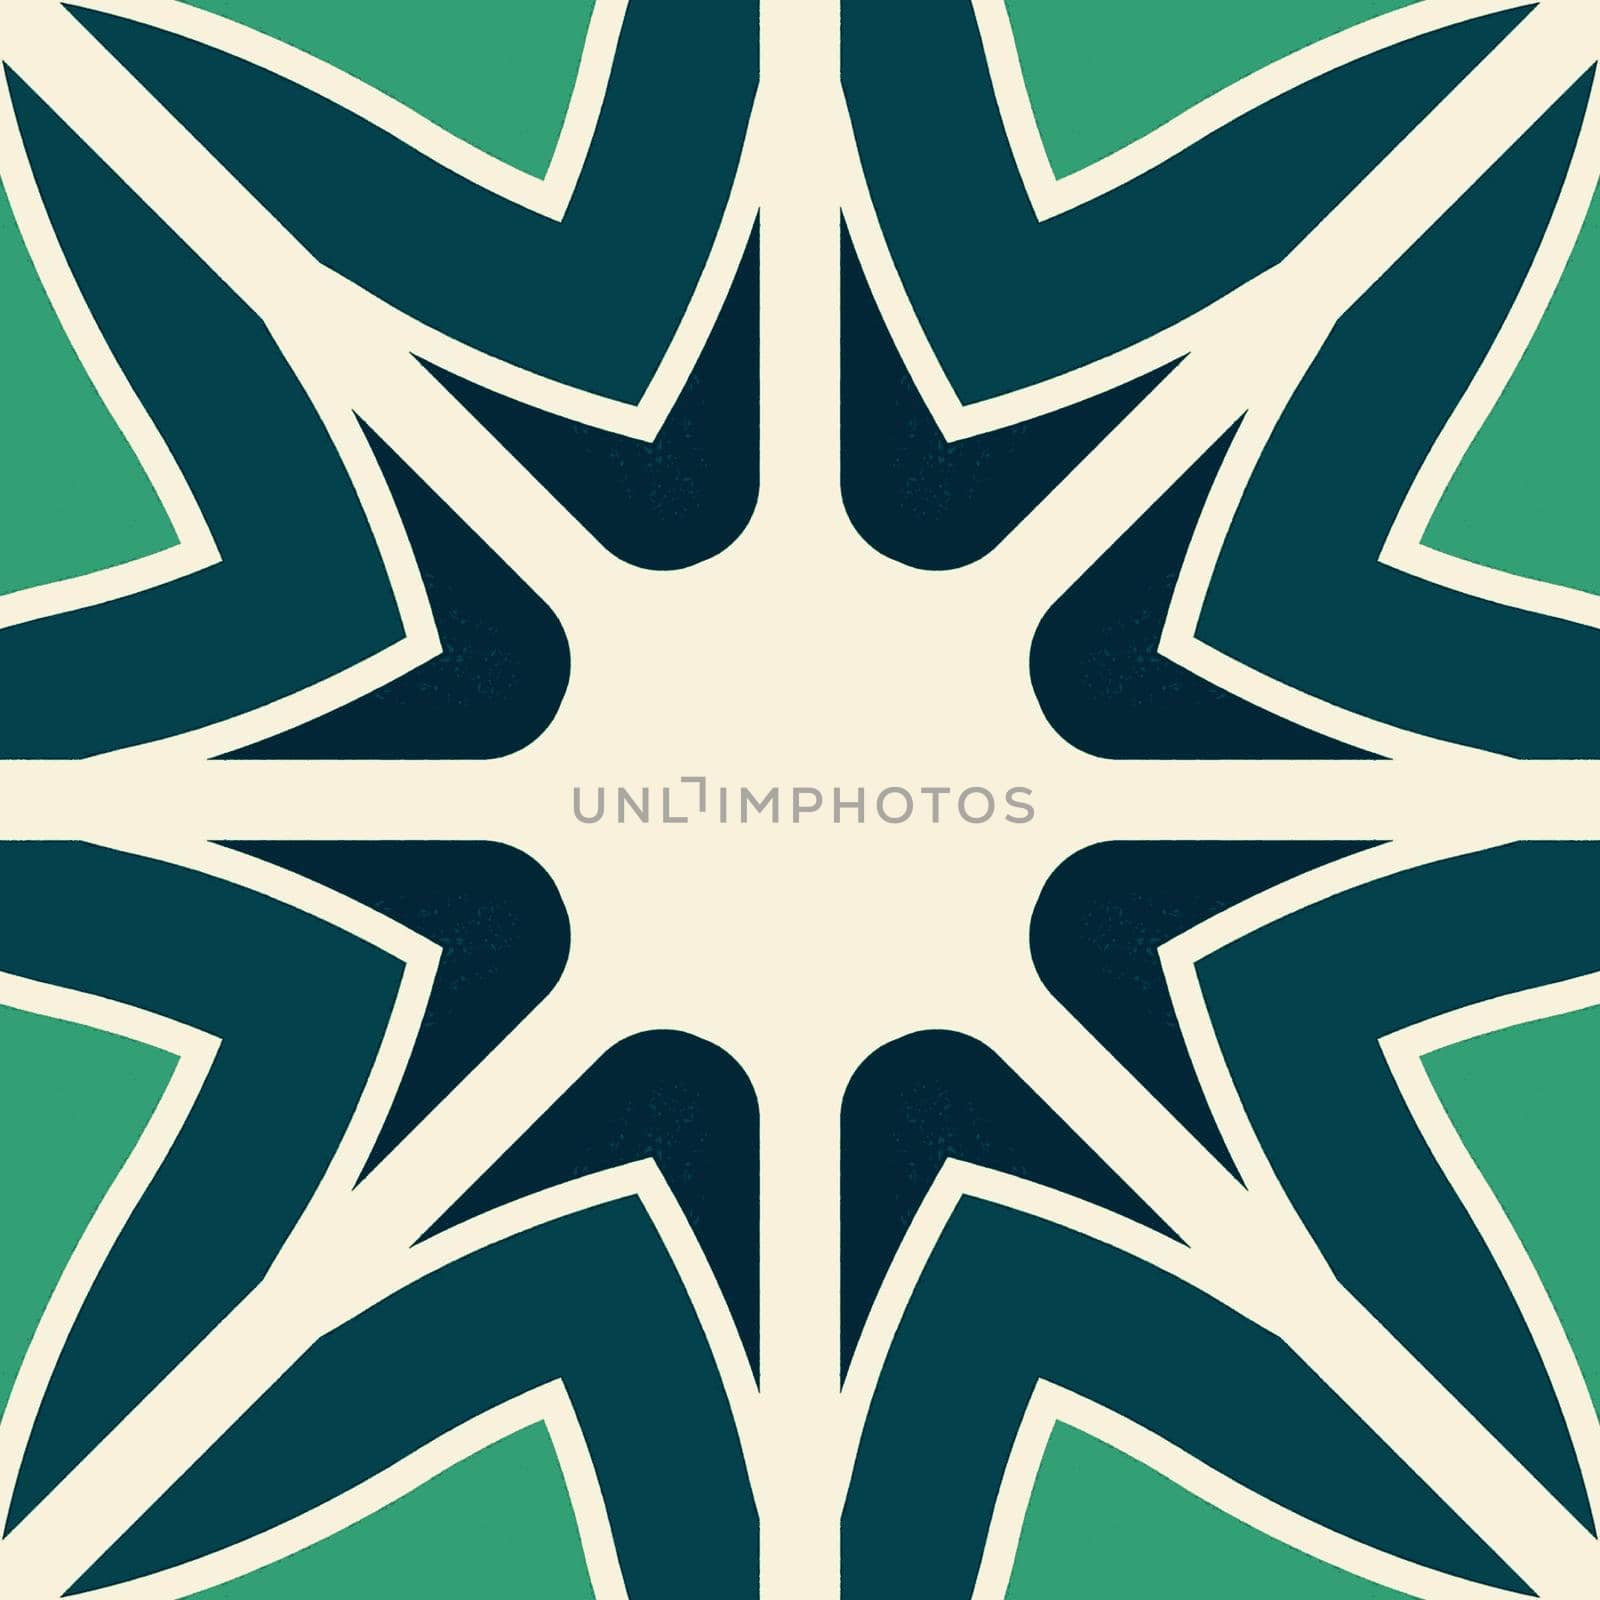 Beautiful shades of green color symmetrical patterns designs